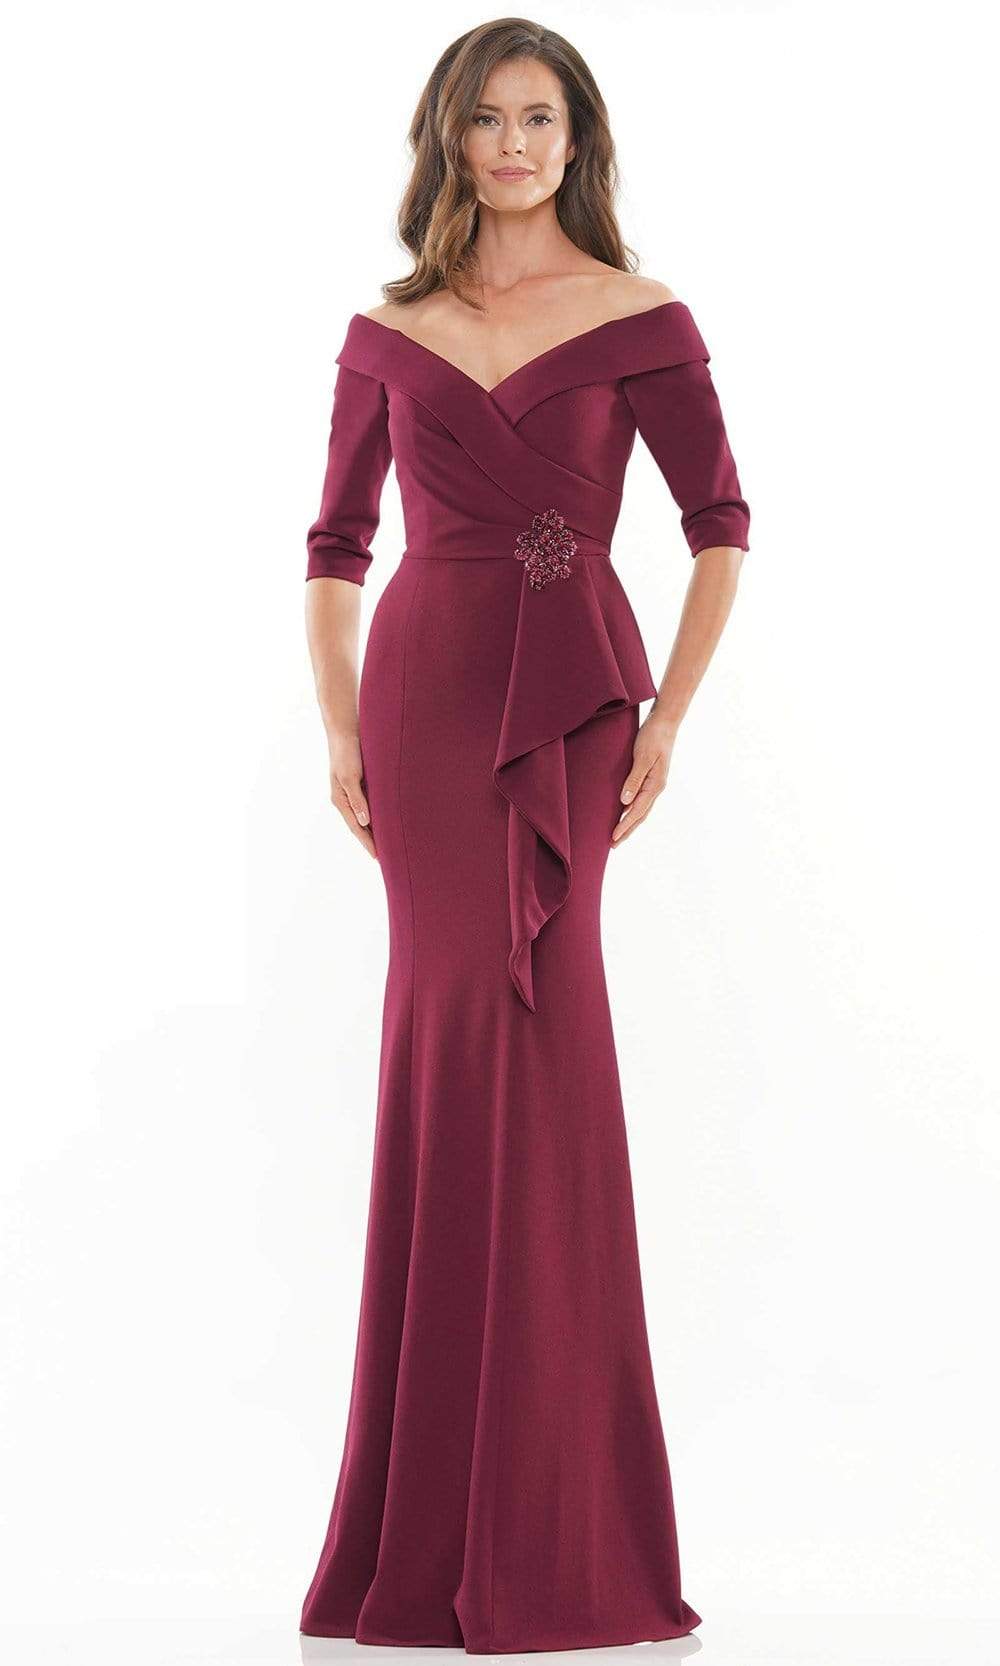 Rina Di Montella - RD2733 Off-Shoulder Quarter Sleeve Prom Gown Mother of the Bride Dresses